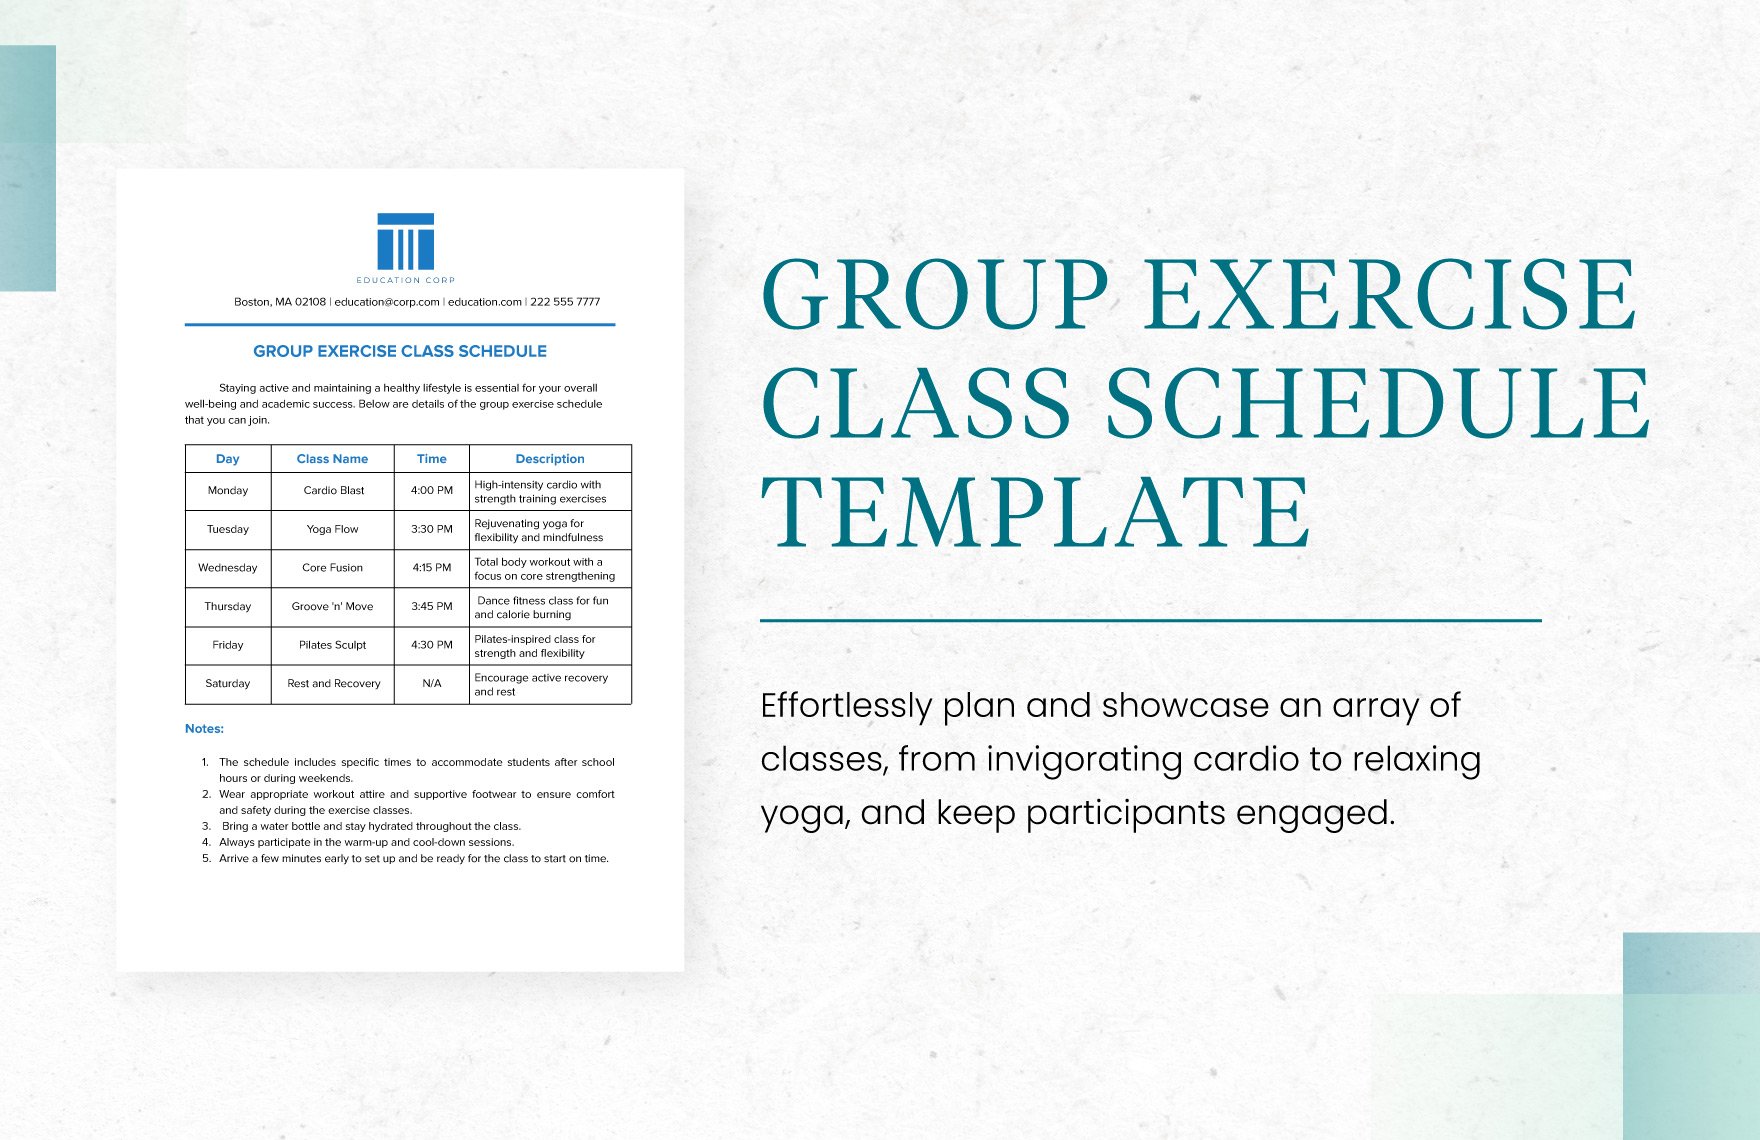 Group Exercise Class Schedule Template